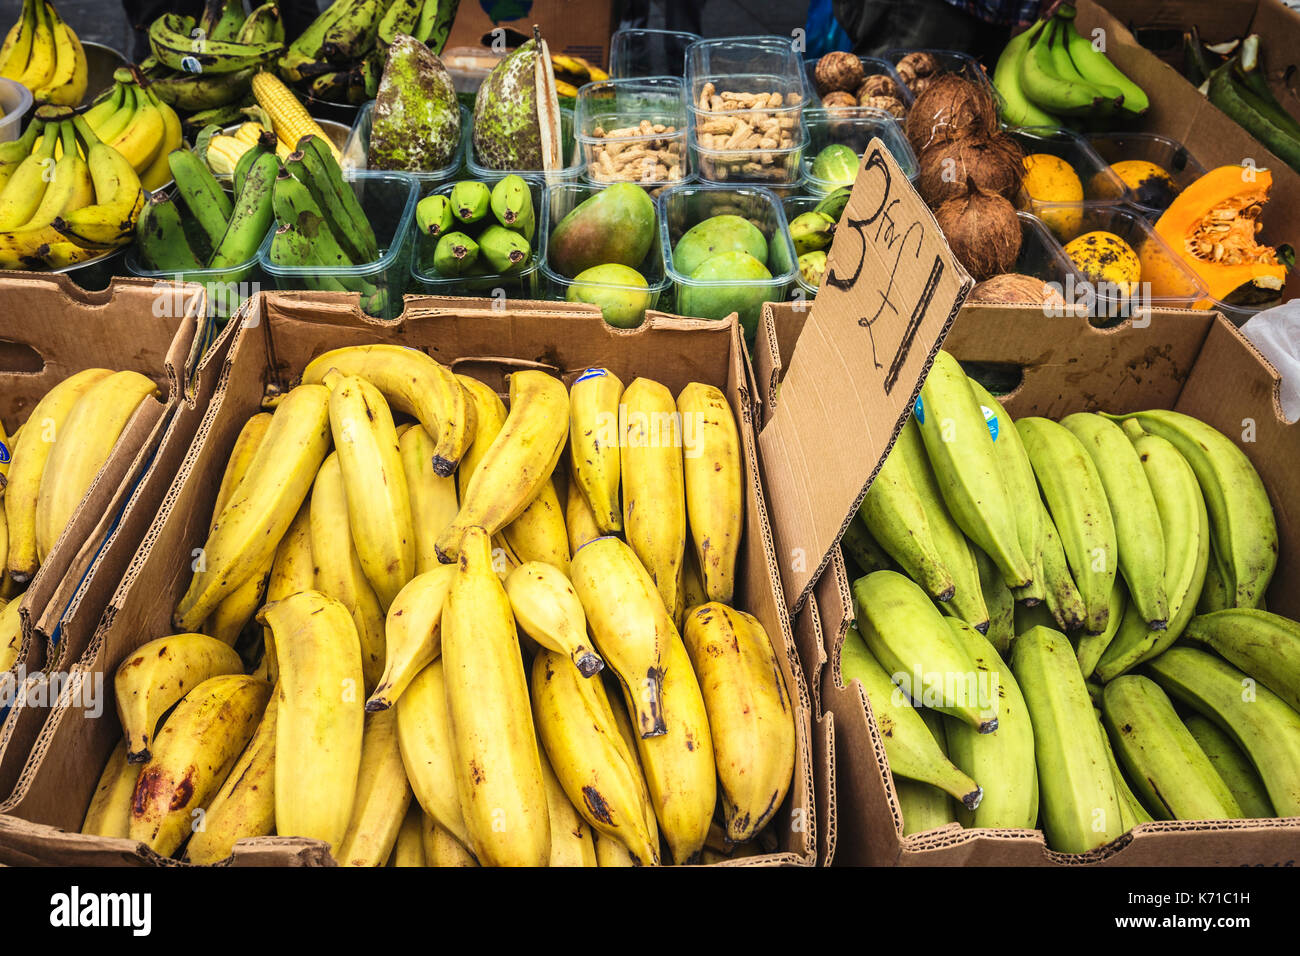 Selection of African Fruits on Market Stall in London Stock Photo